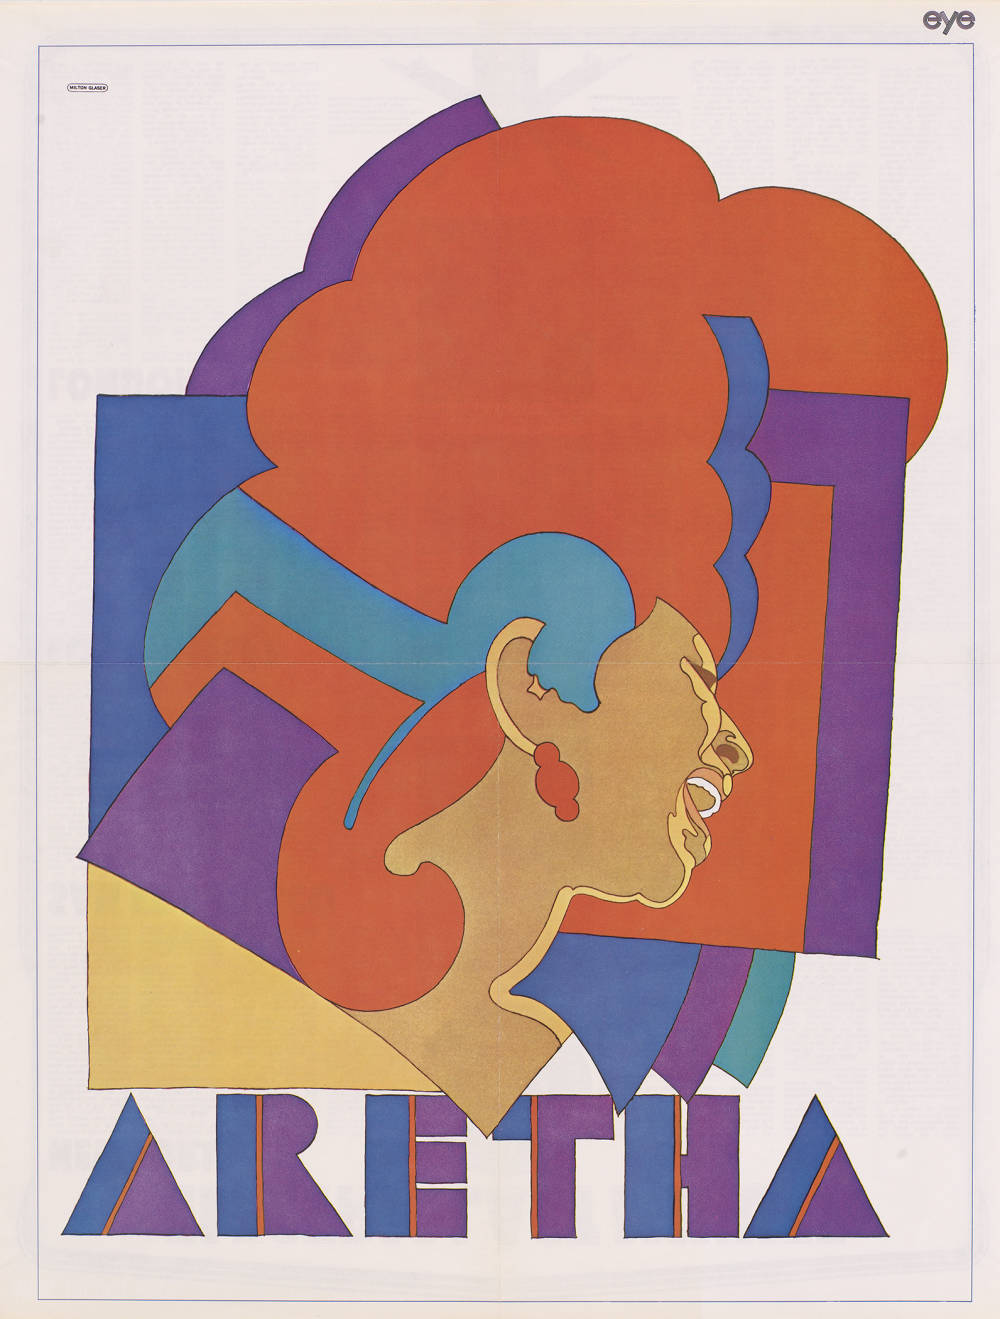  Milton Glaser , Aretha Franklin, Color Photolithographic Poster, 1968 